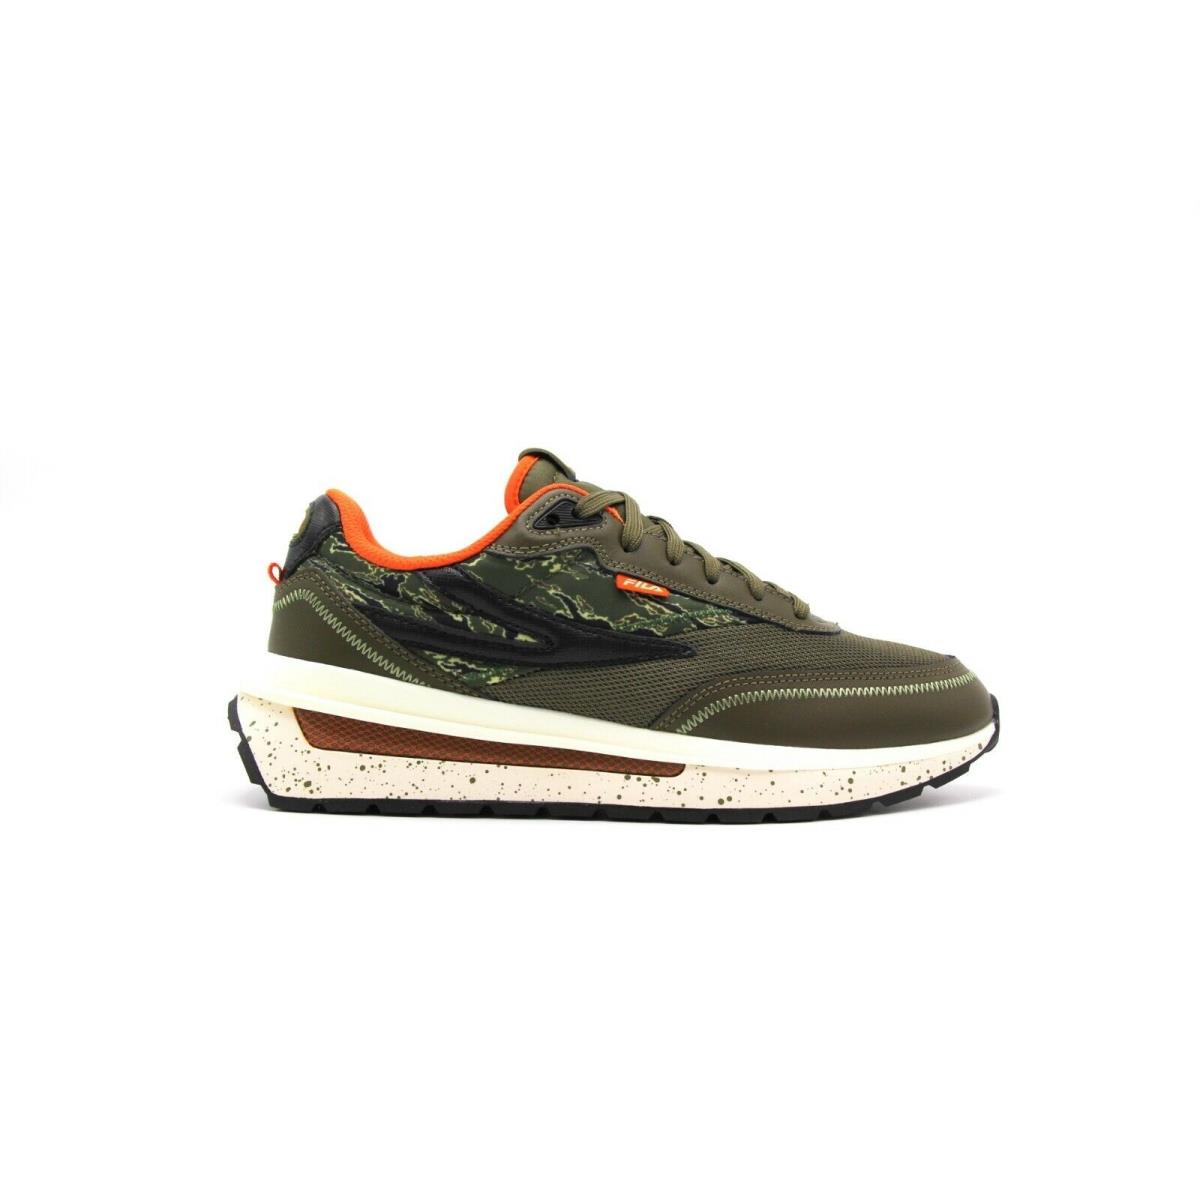 Men Fila Renno Camouflage Green Retro Edition Running Lace UP Sneakers - CAMOUFLAGE GREEN ORANGE